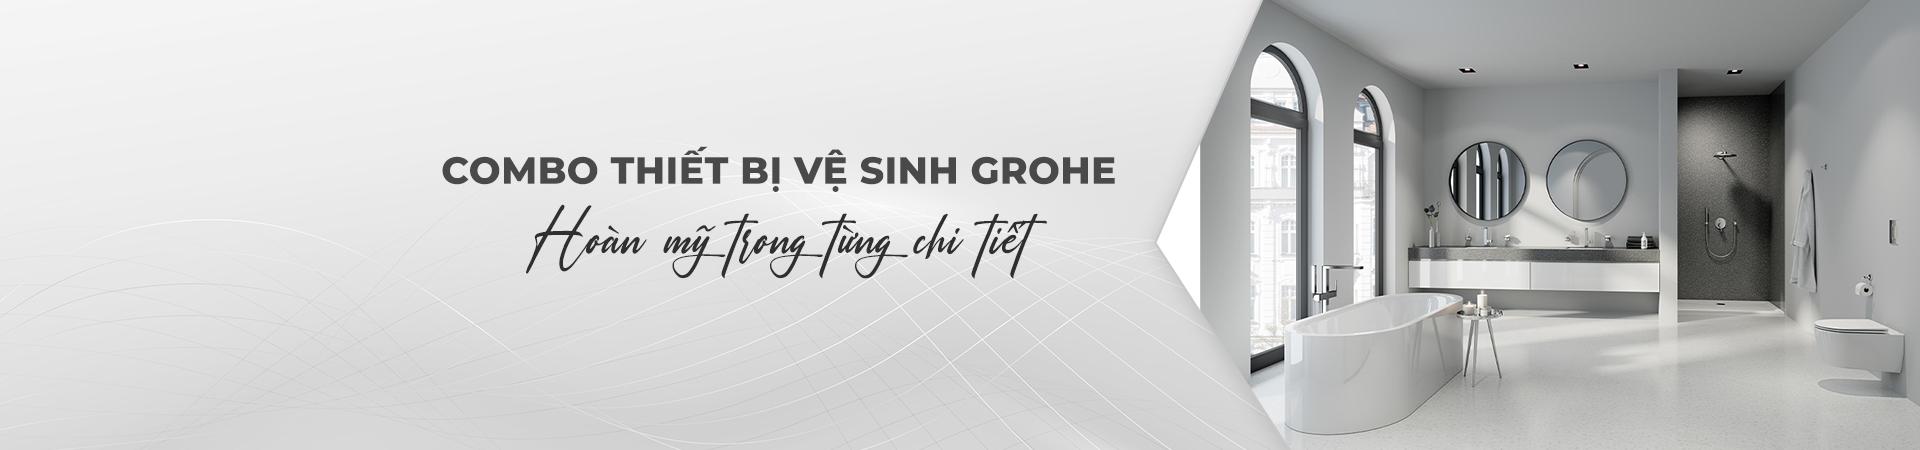 Combo thiết bị vệ sinh GROHE